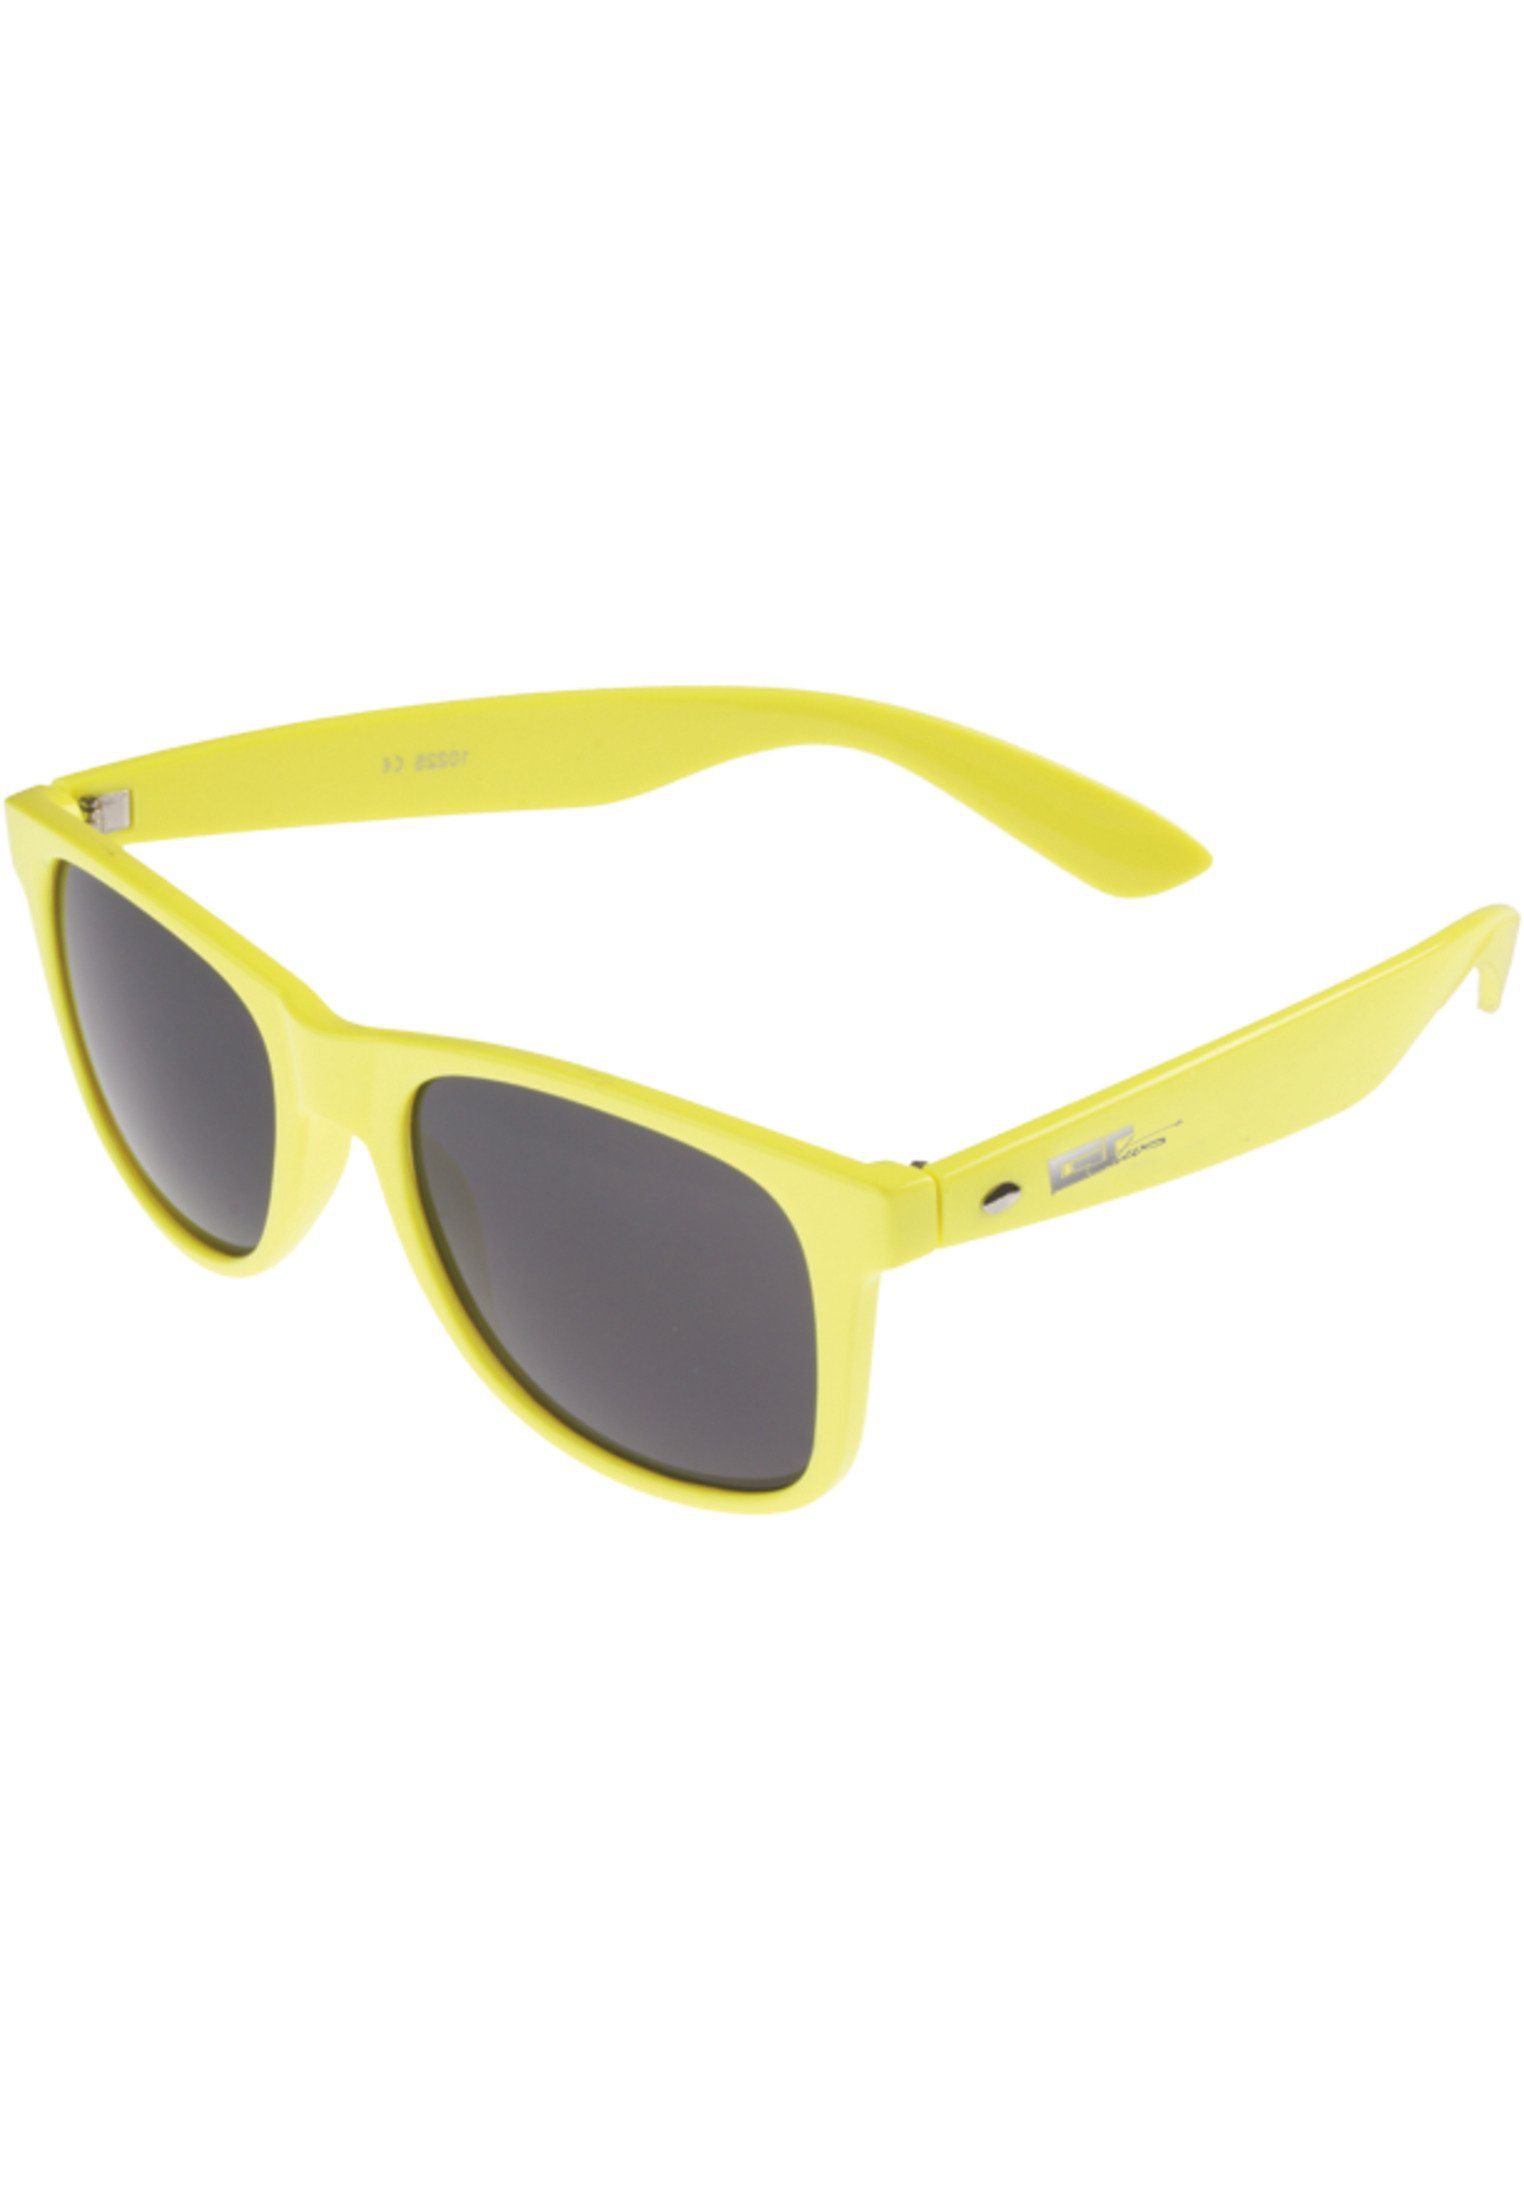 Shades Groove Sonnenbrille Accessoires GStwo MSTRDS neonyellow